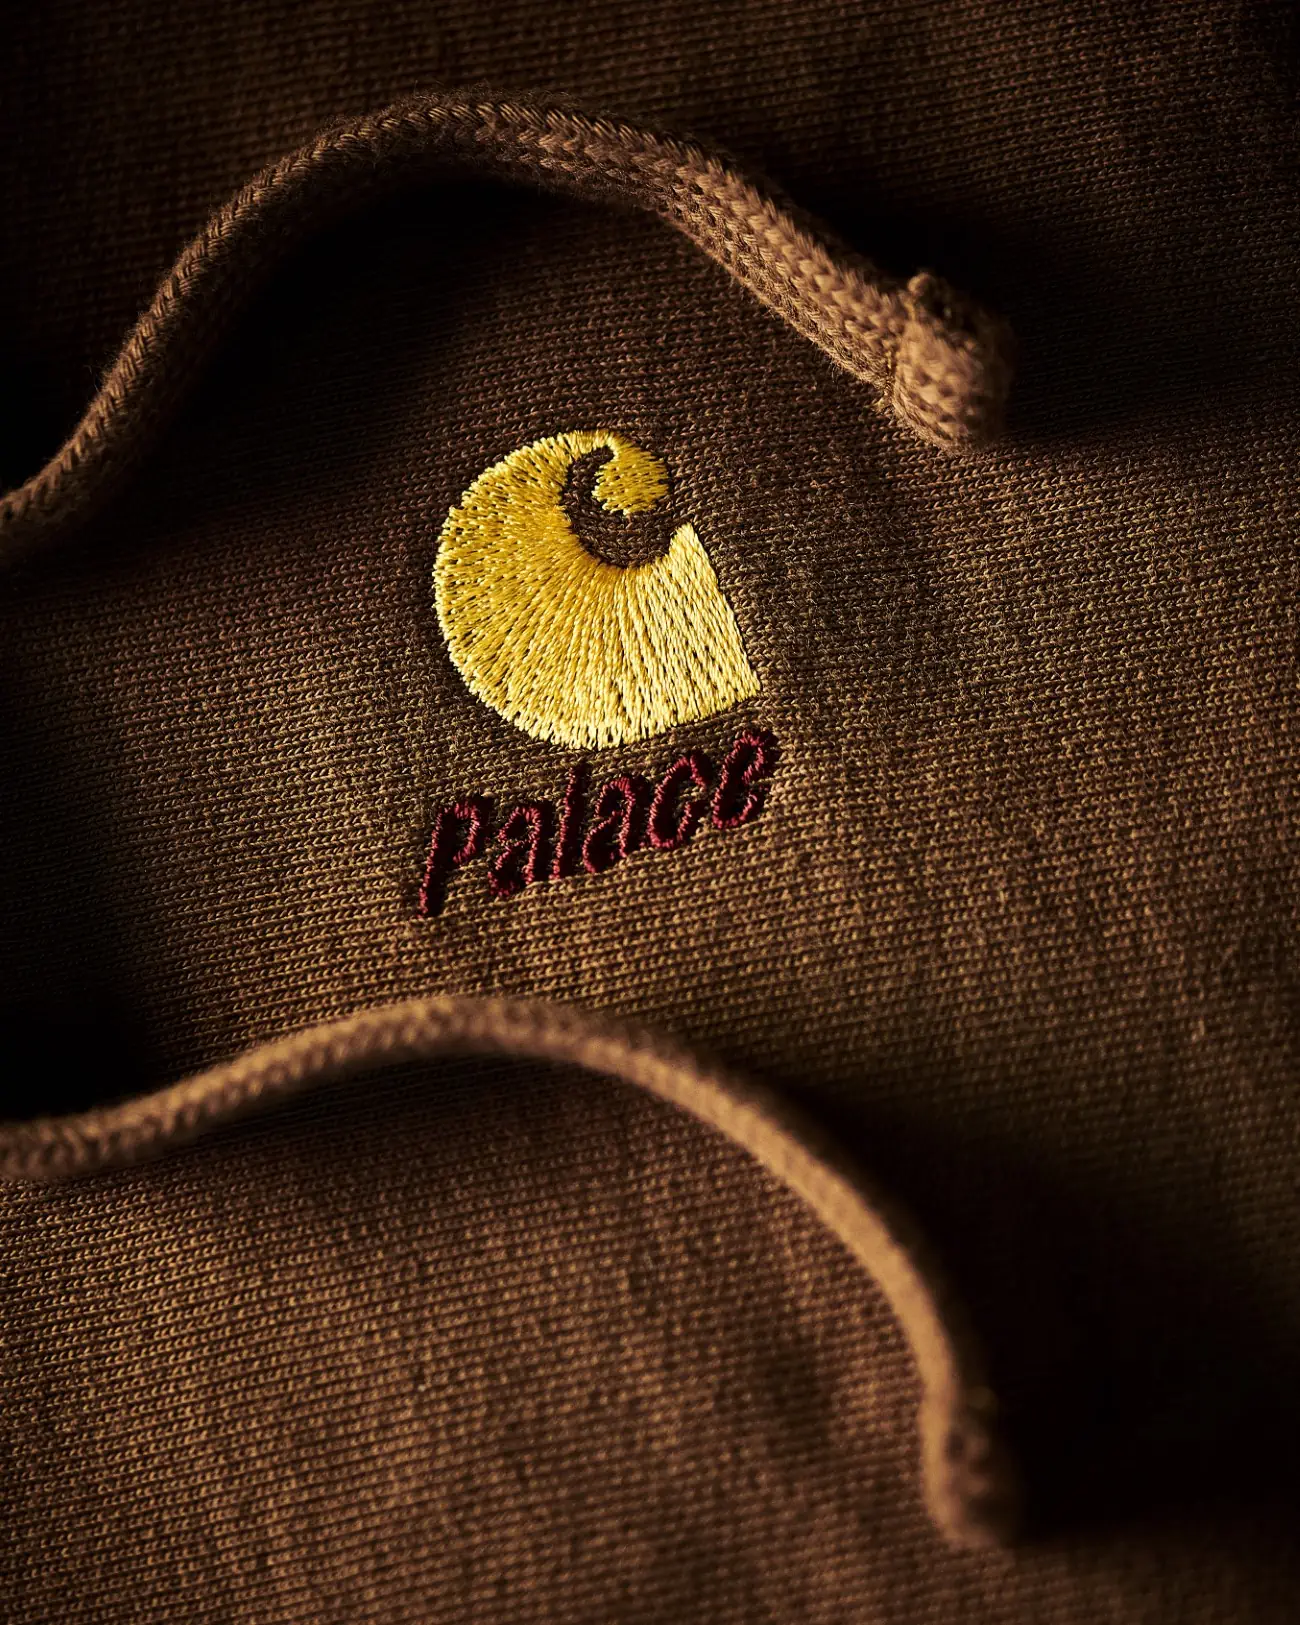 The first collaboration of Carhartt WIP x Palace